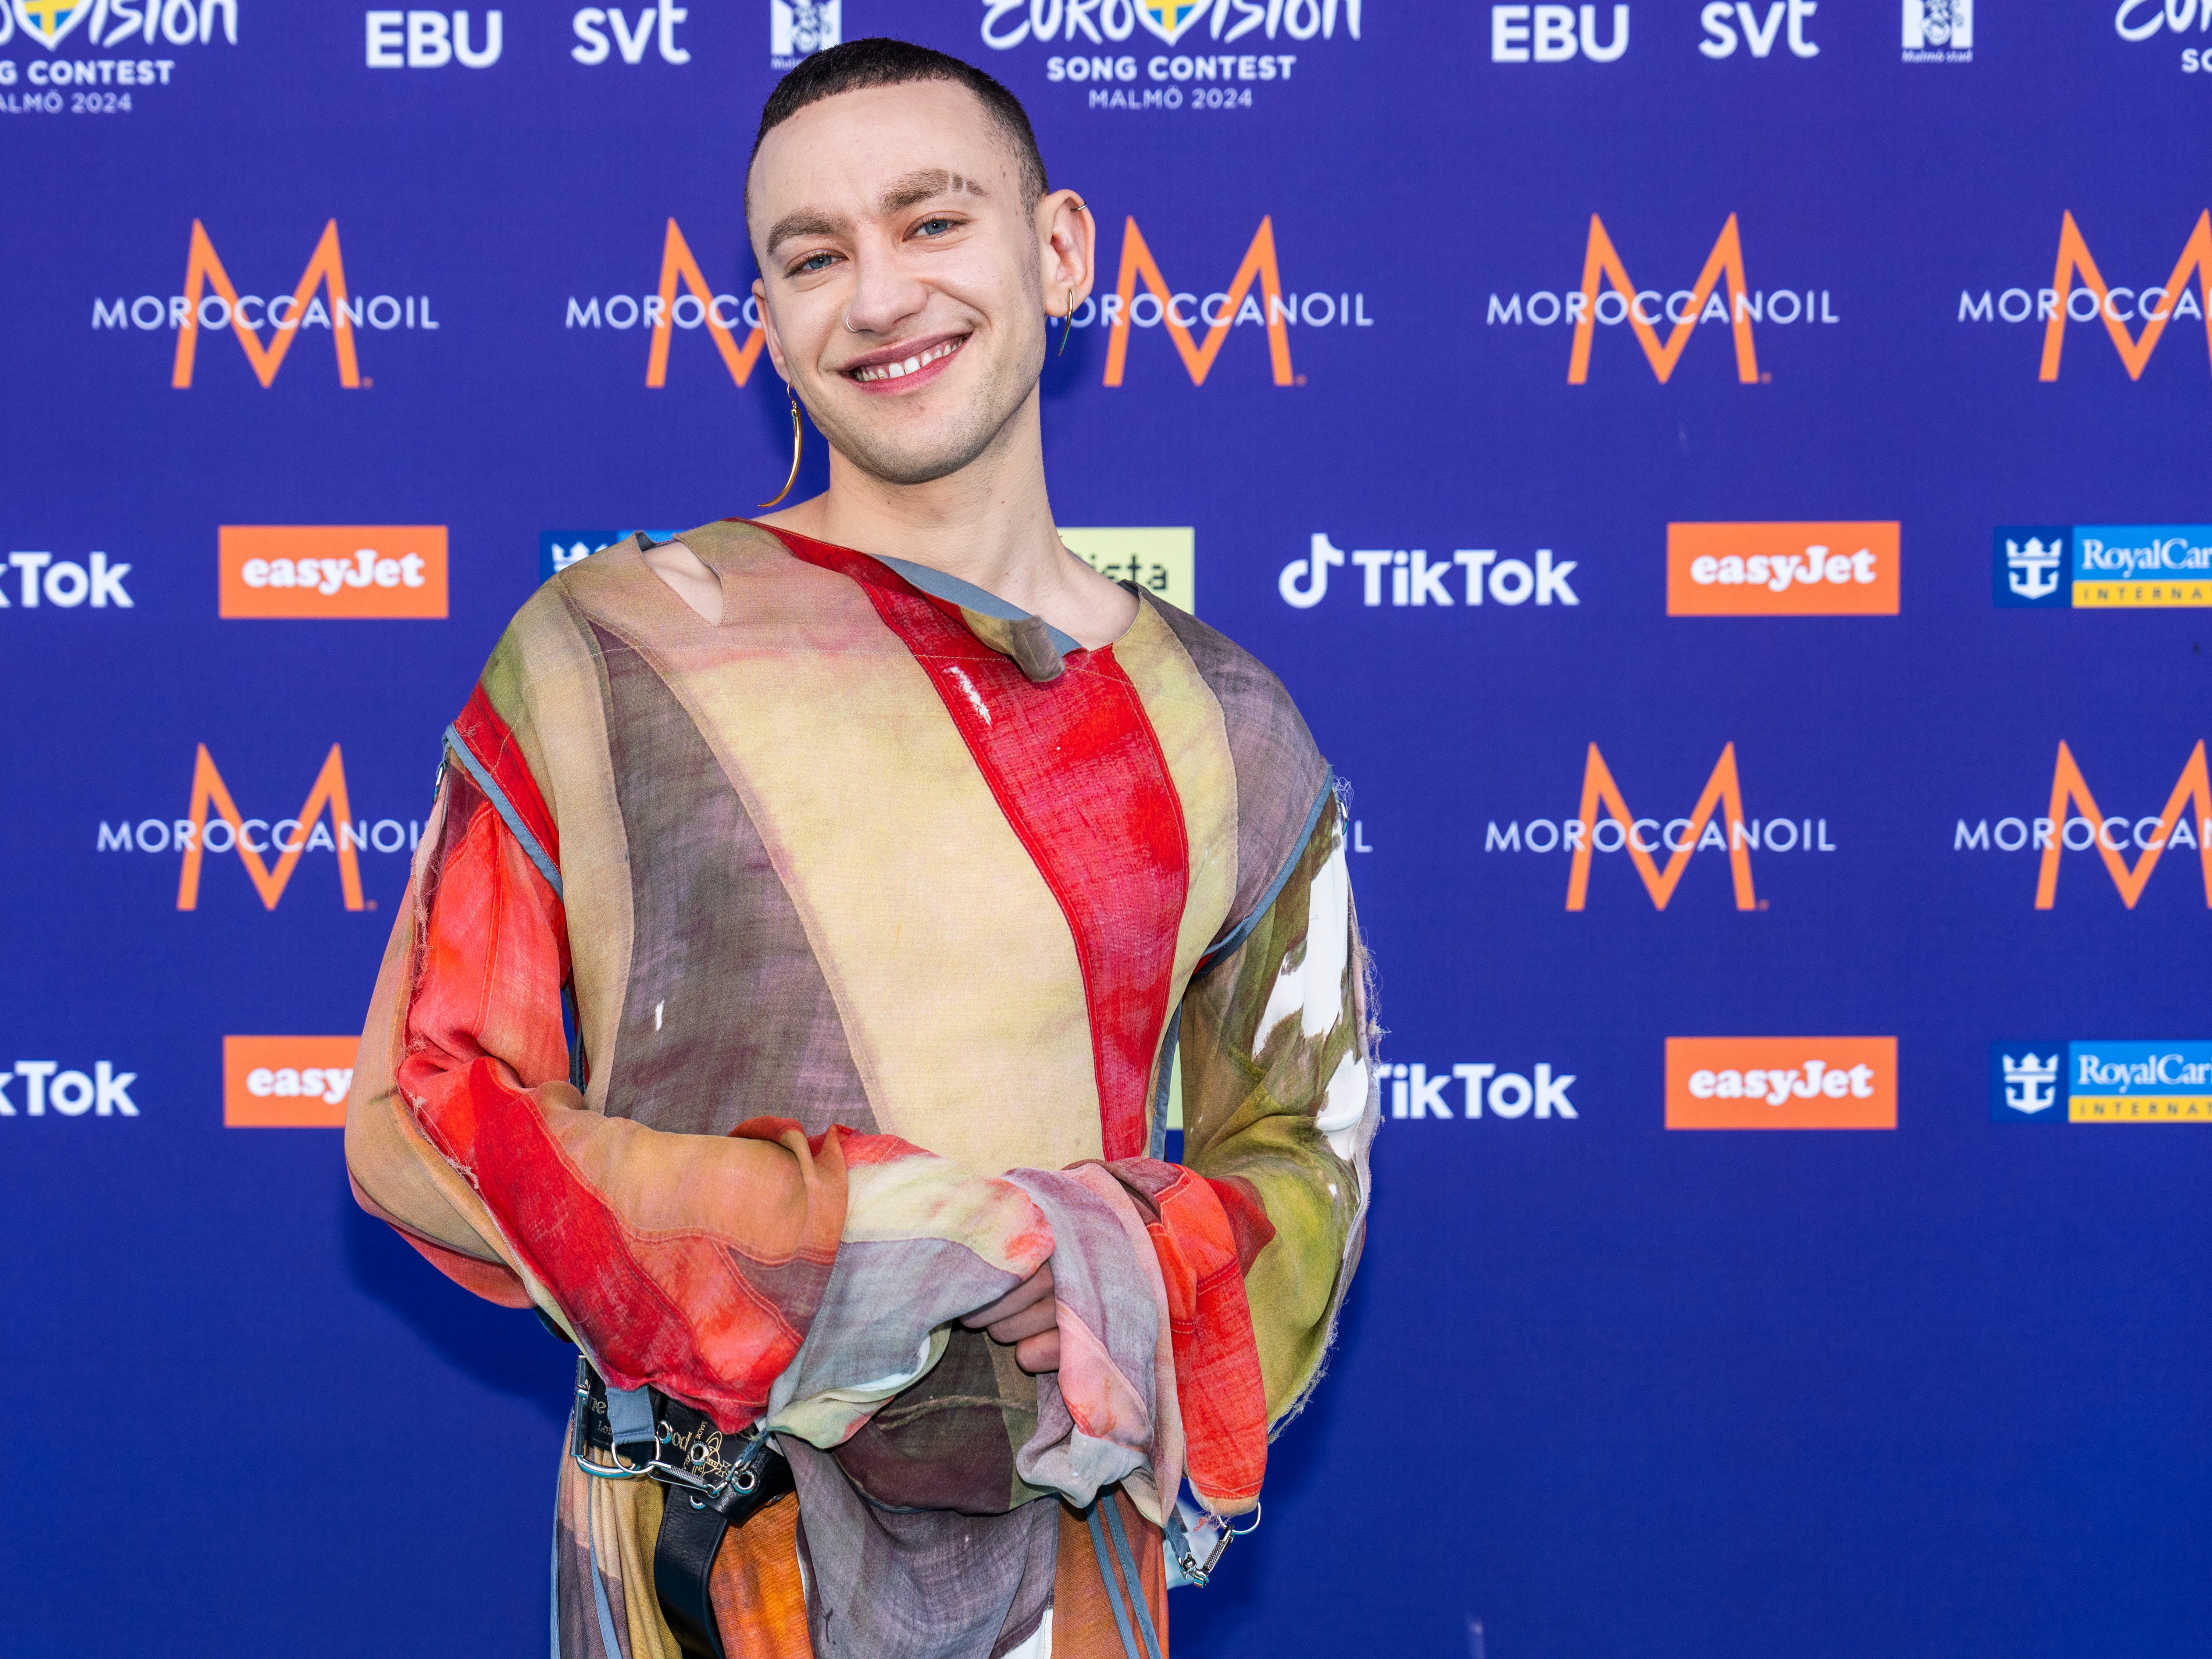 Olly Alexander supports those protesting against this year’s competition